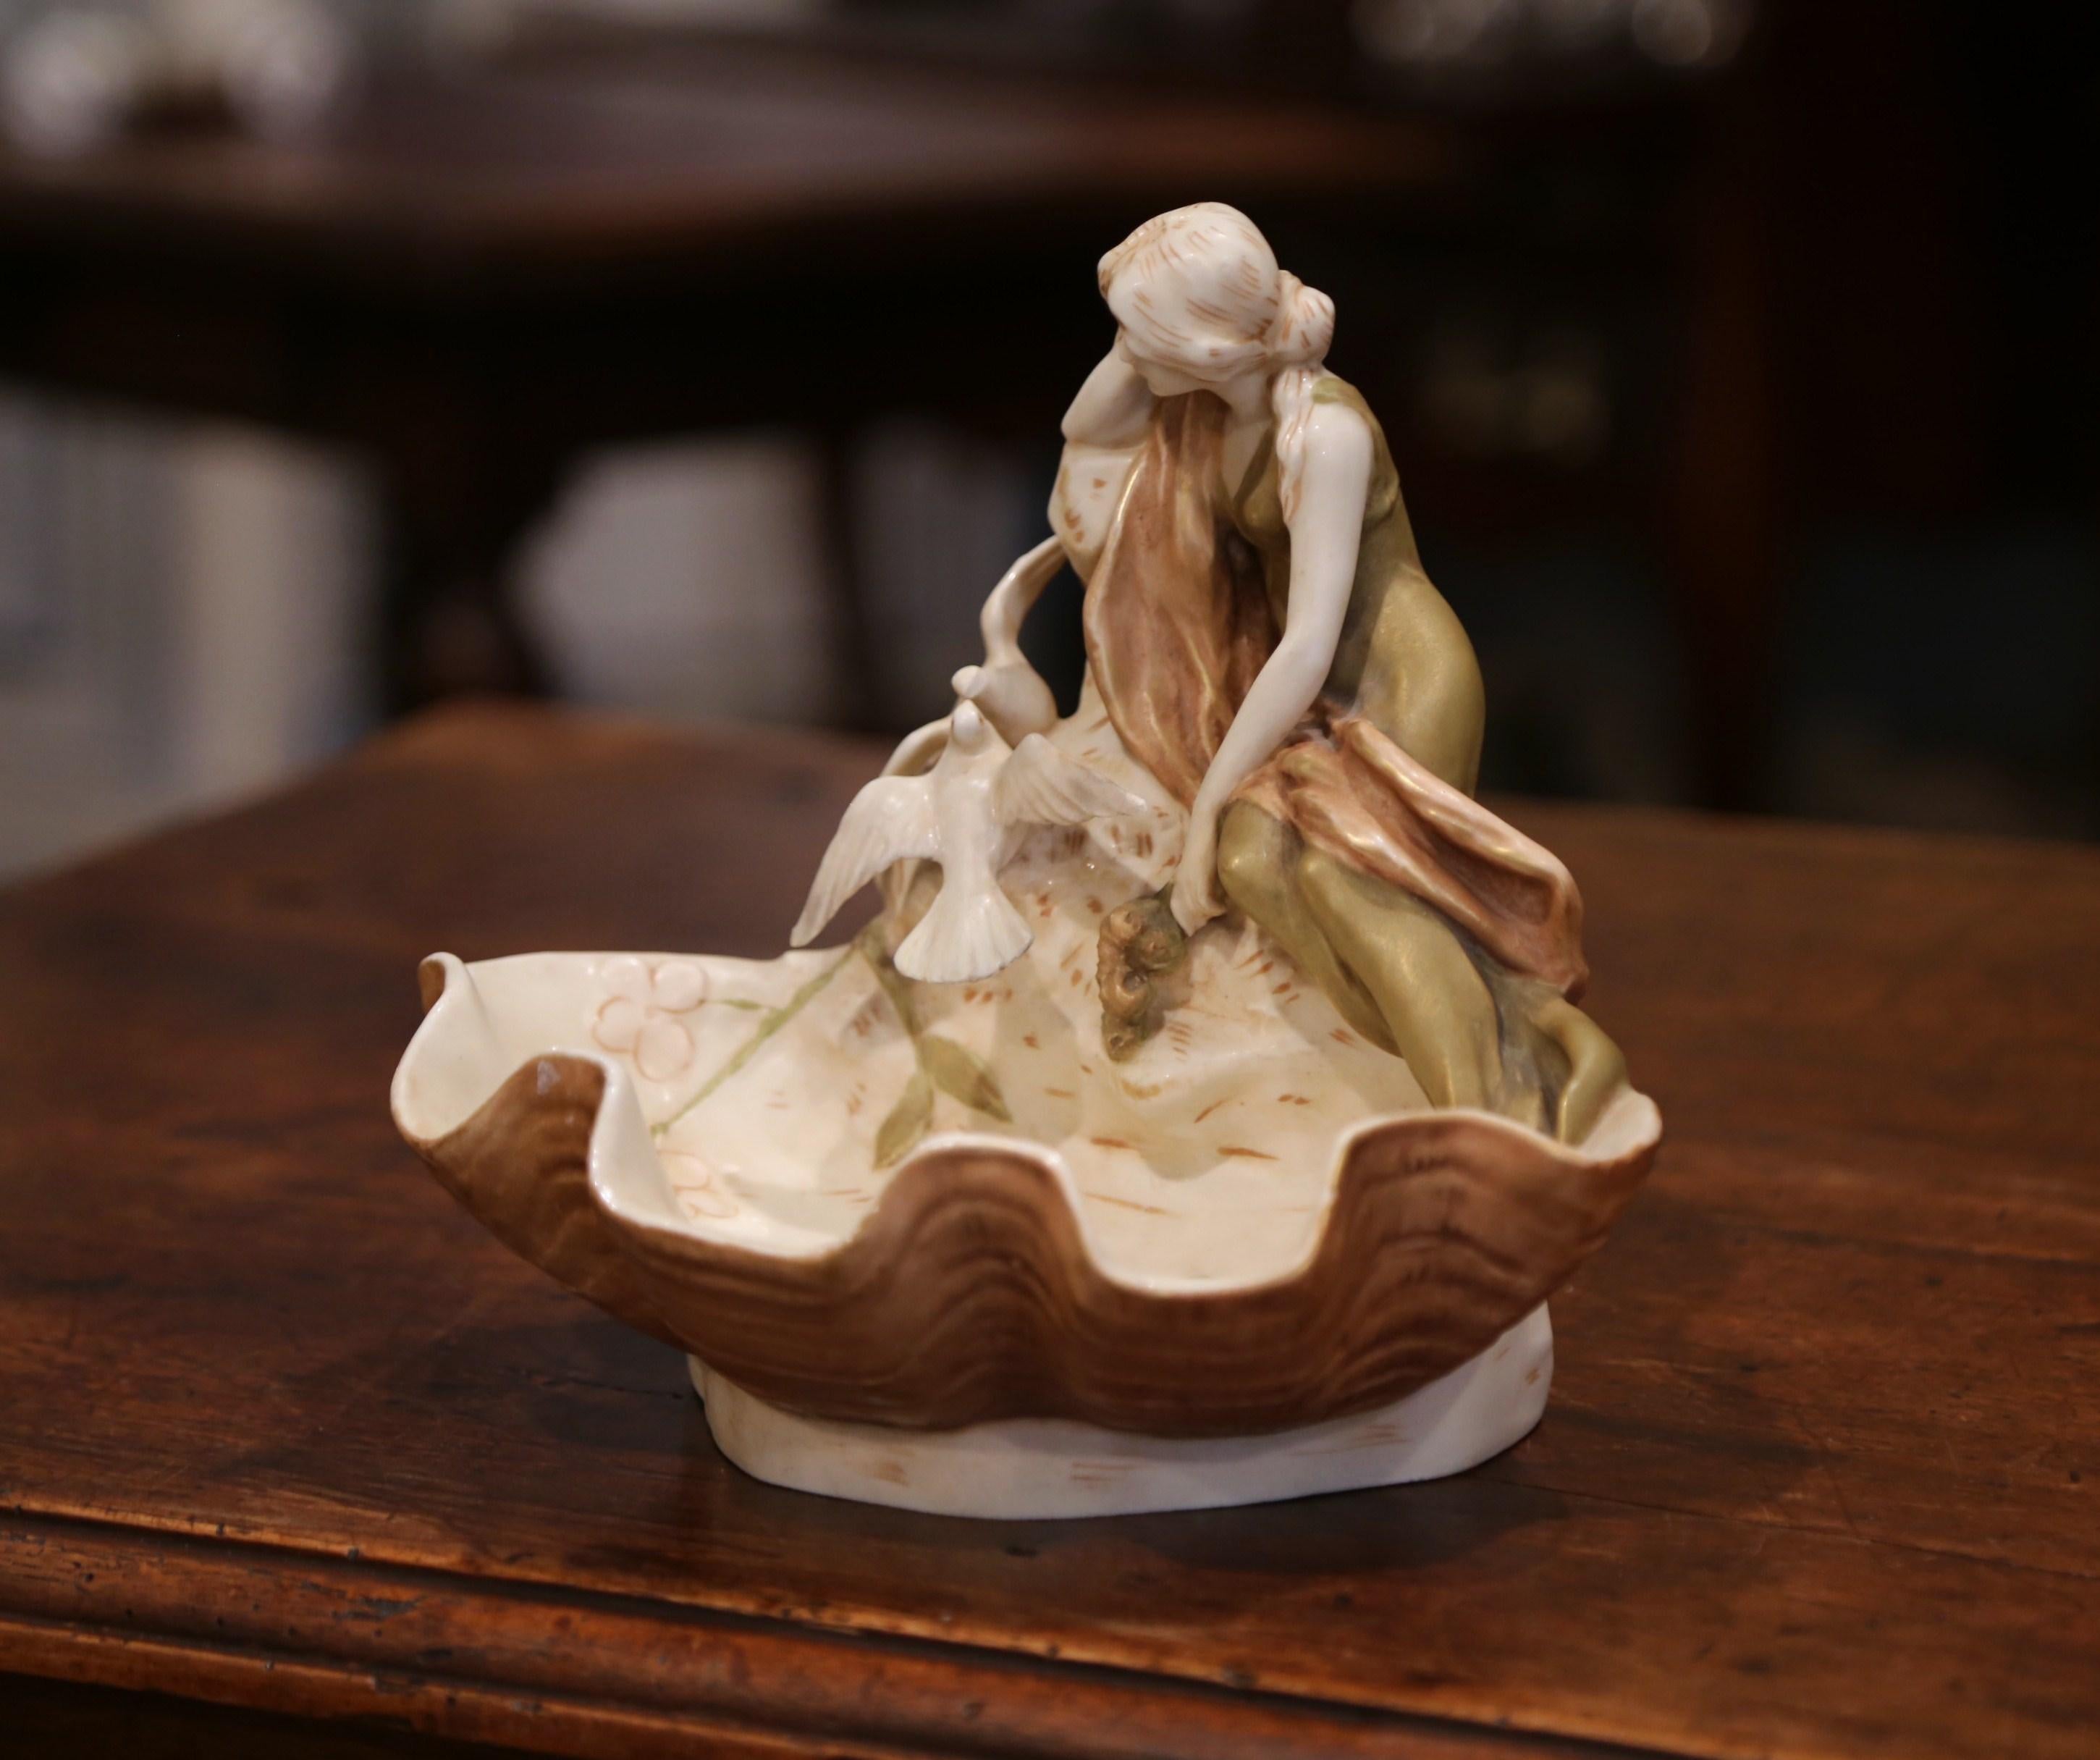 Place this decorative porcelain dish on your entry commode to collect loose change! Crafted in the Czech Republic circa 1930, the art deco sculpture features a woman statue sited on the edge of a basin with two doves on her side. The carved